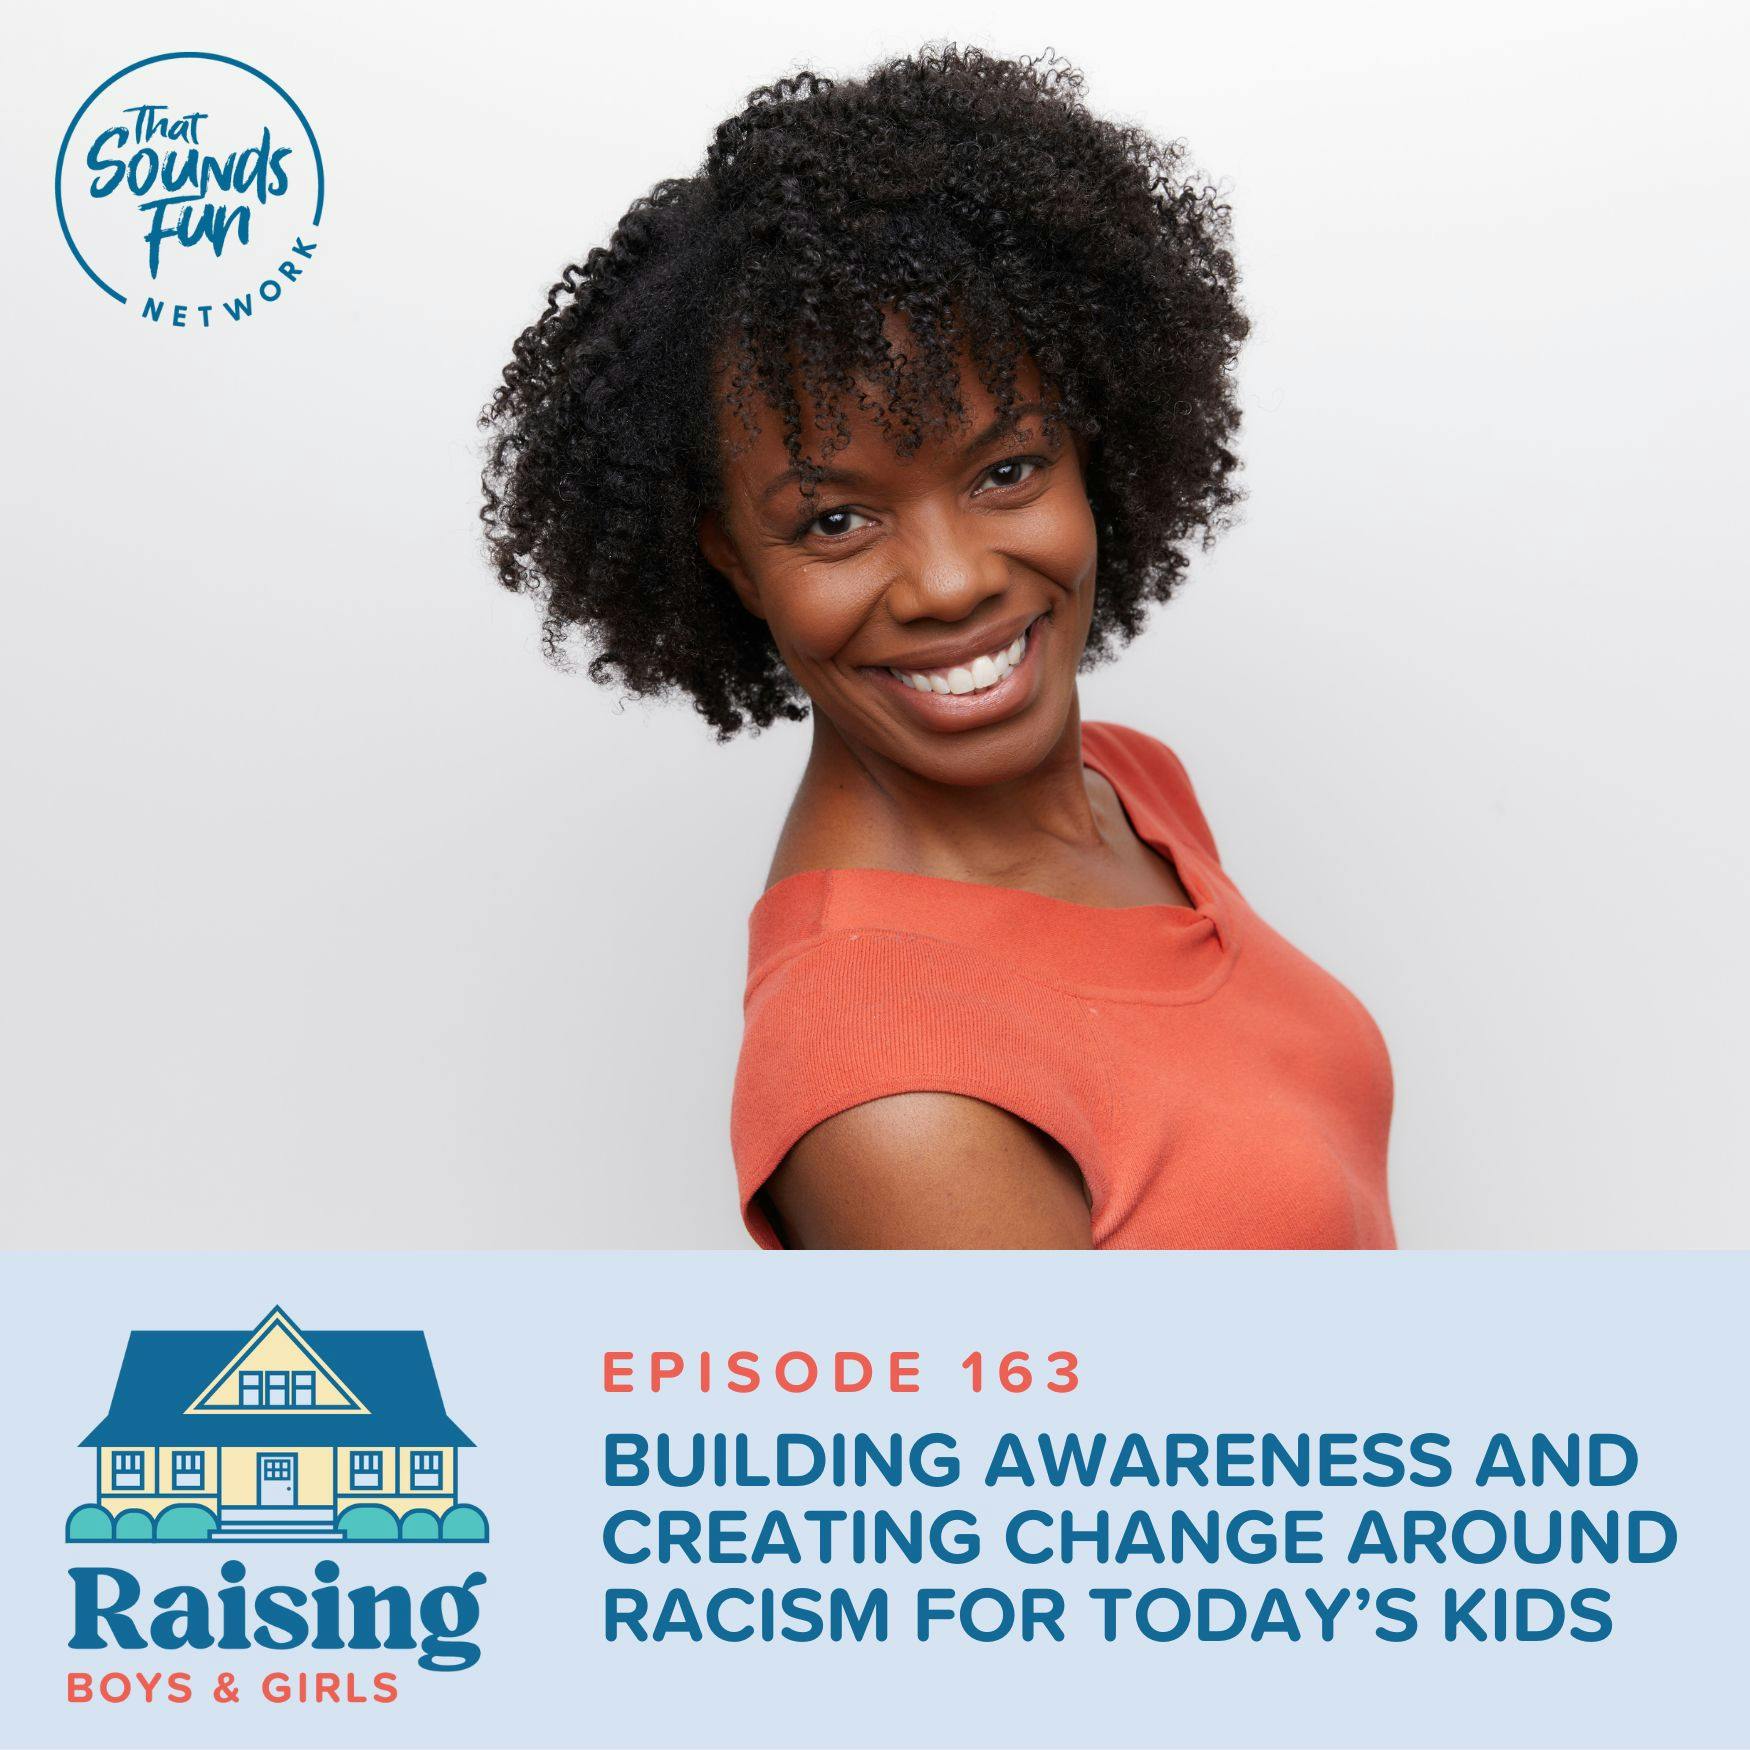 Episode 163: Building Awareness and Creating Change around Racism for Today’s Kids